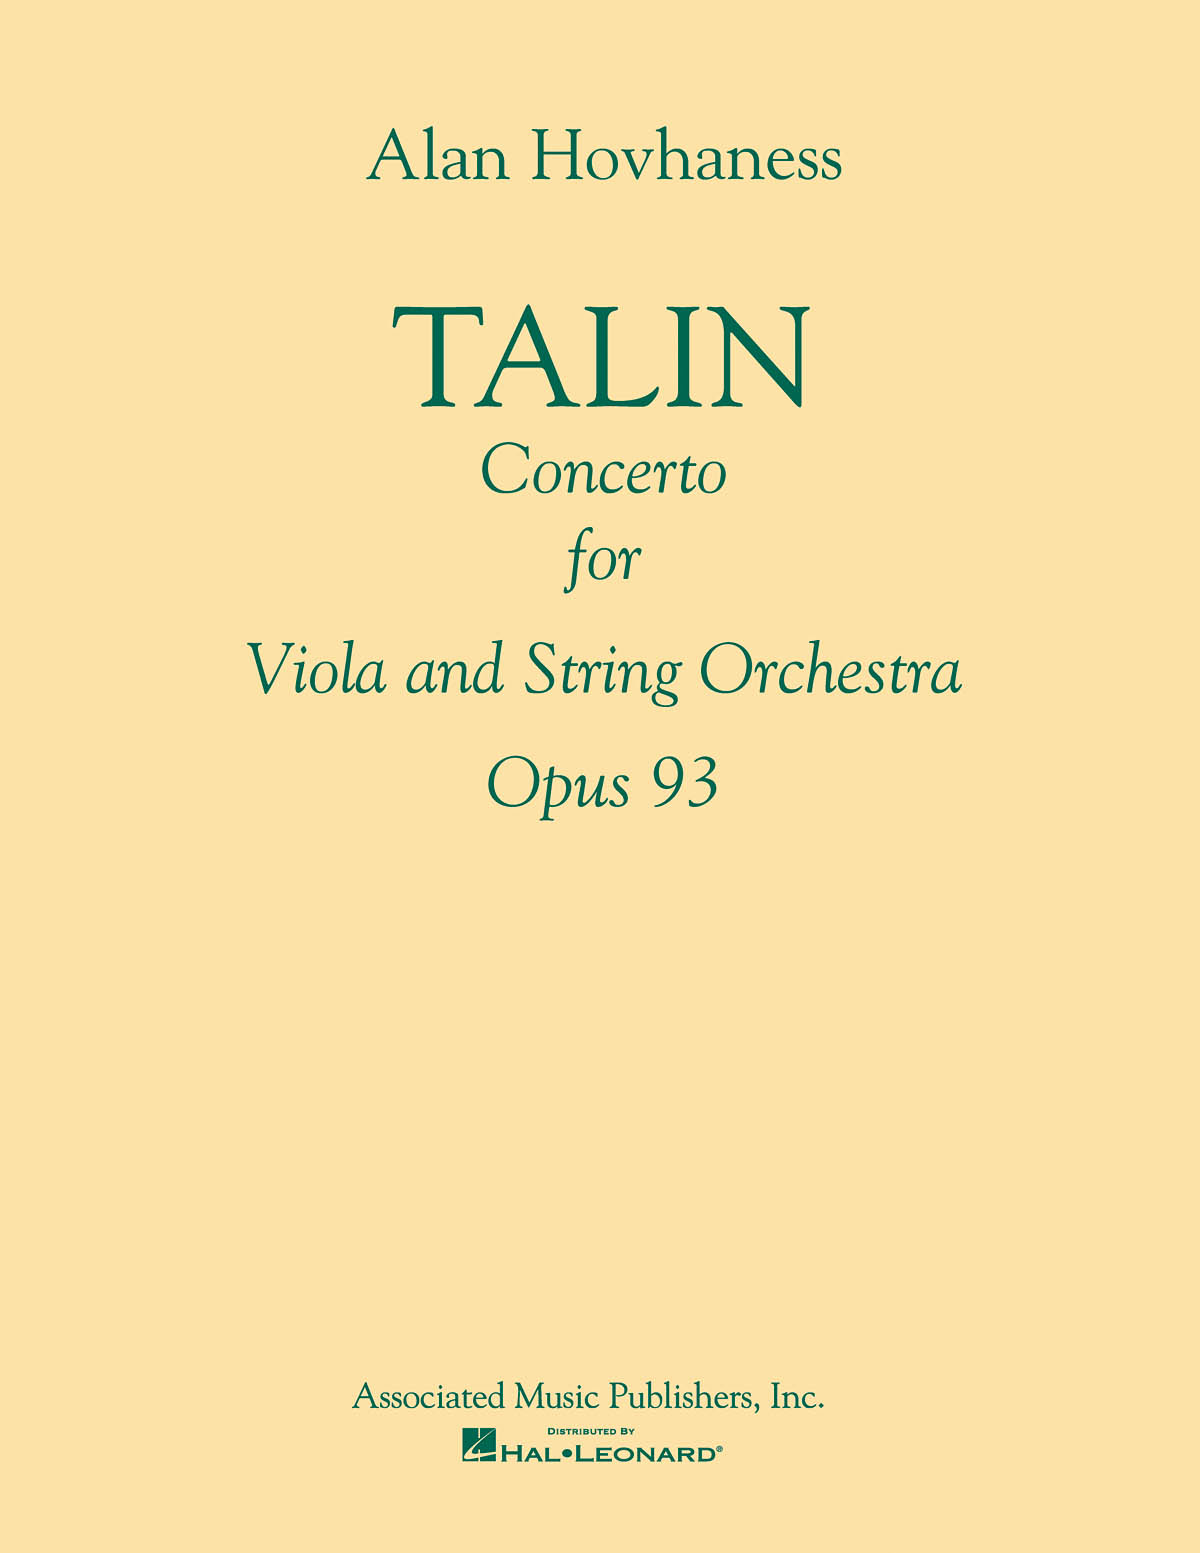 Alan Hovhaness: Talin Concerto For Viola And String Orchestra Op. 93